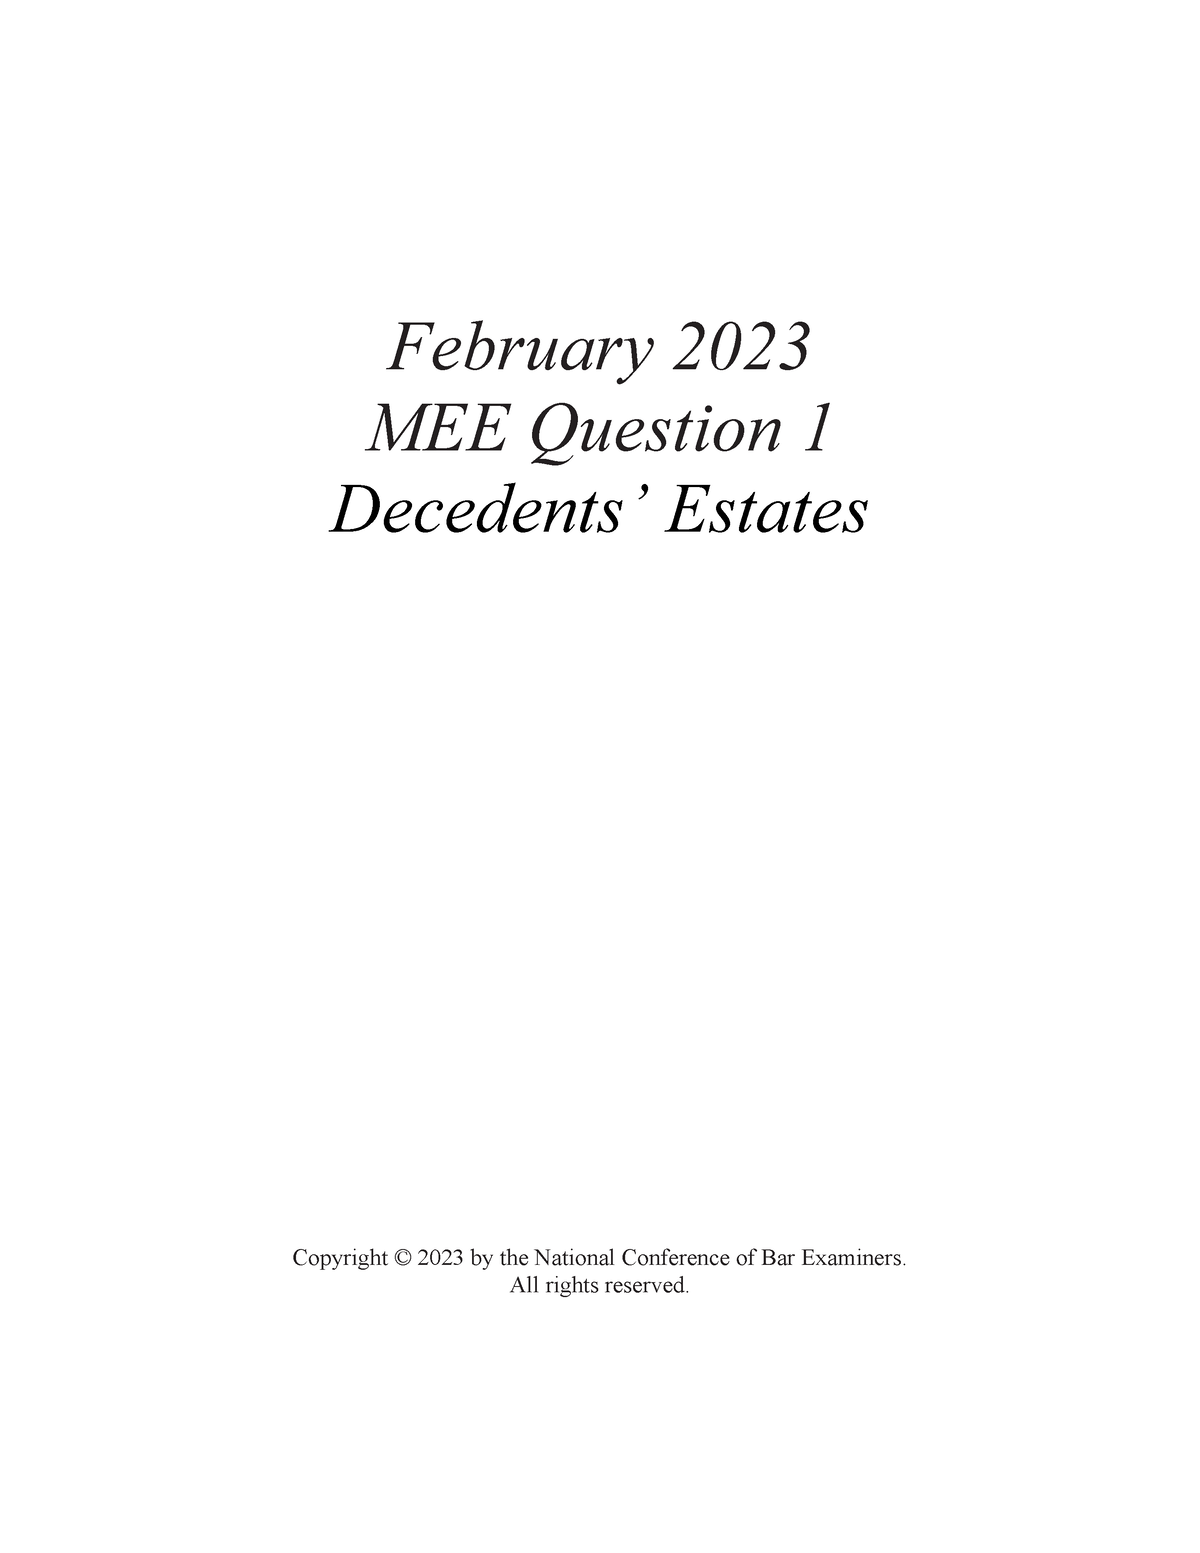 February 2023 MEE Questions All rights reserved. 1 FEBRUARY 2023 MEE